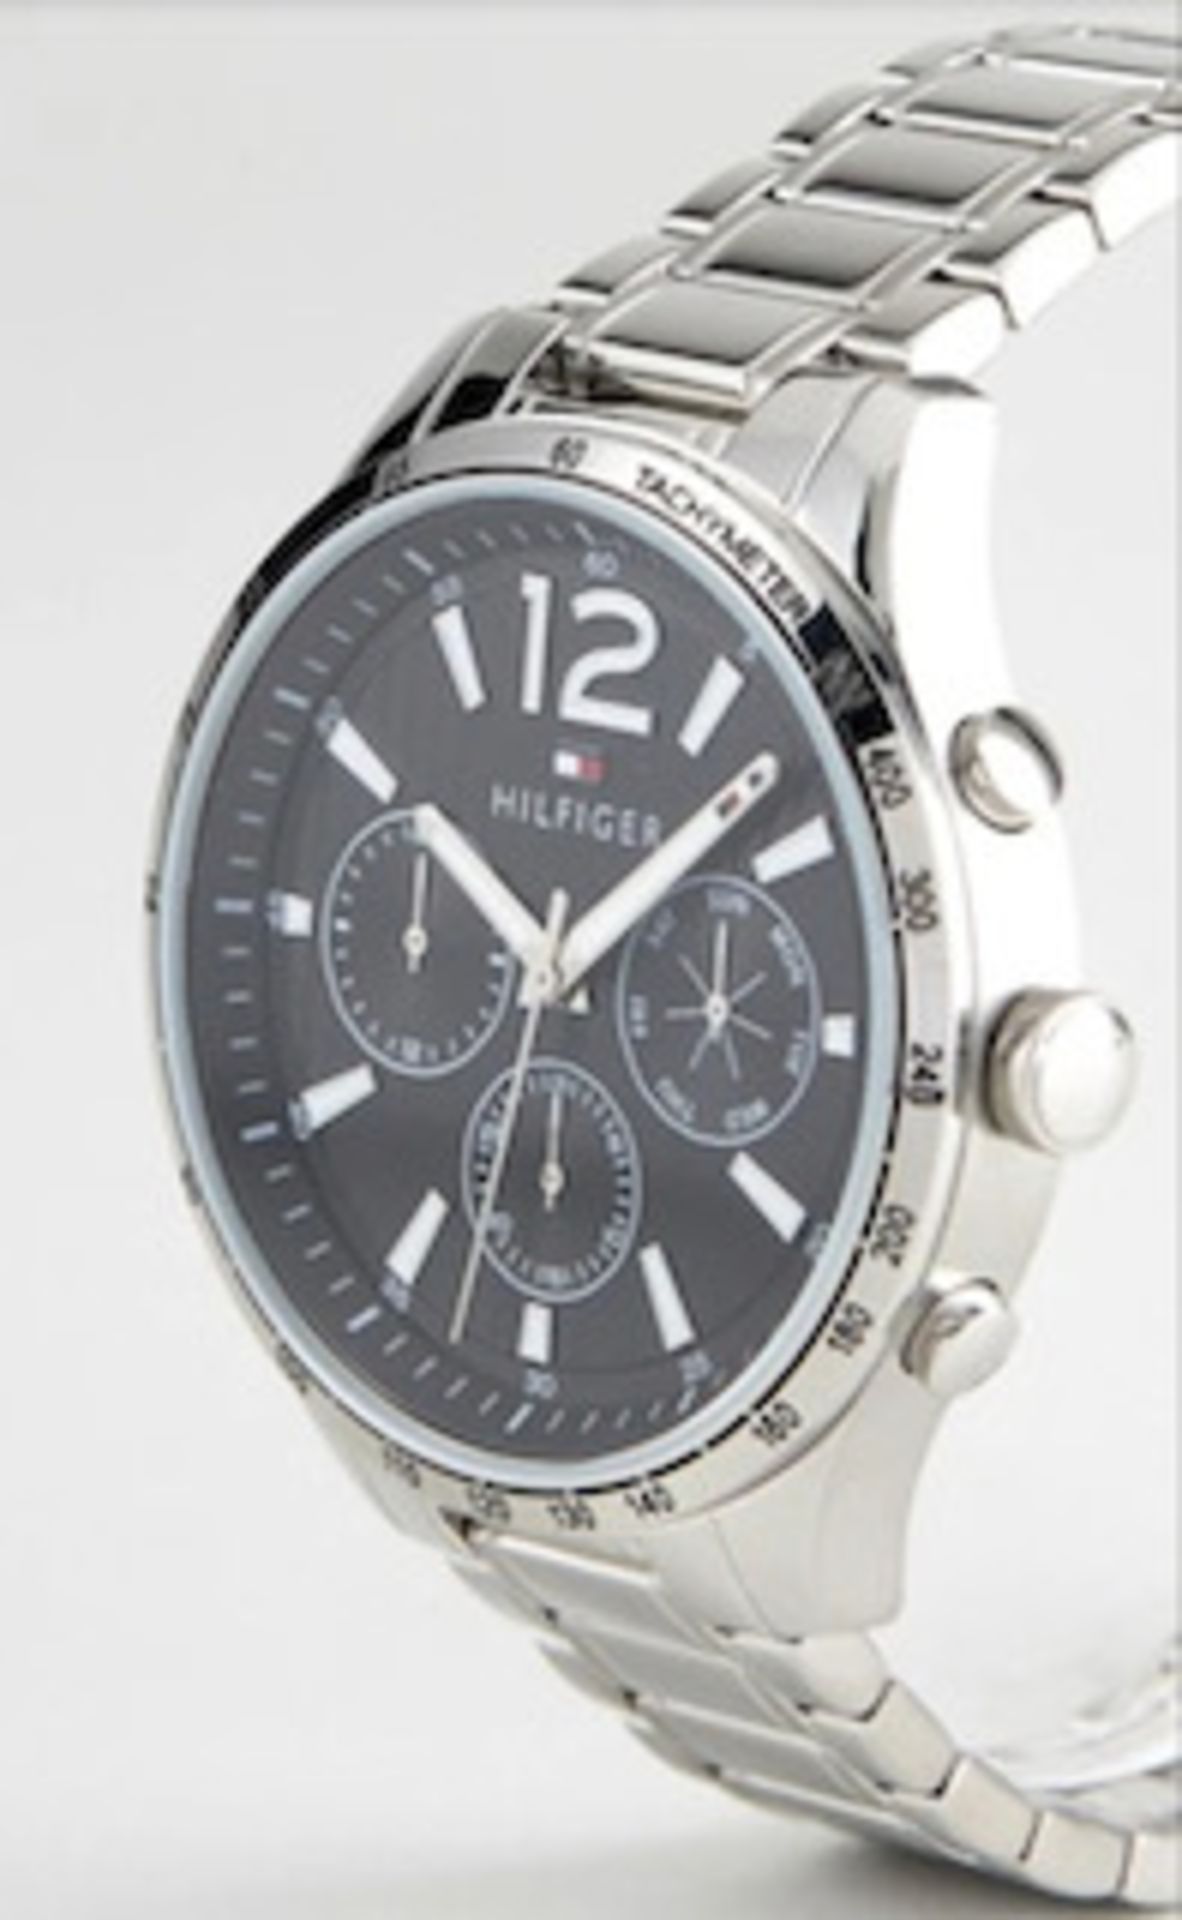 Tommy Hilfiger Men's Gavin Stainless Steel Silver Black Dial Watch - Image 3 of 6